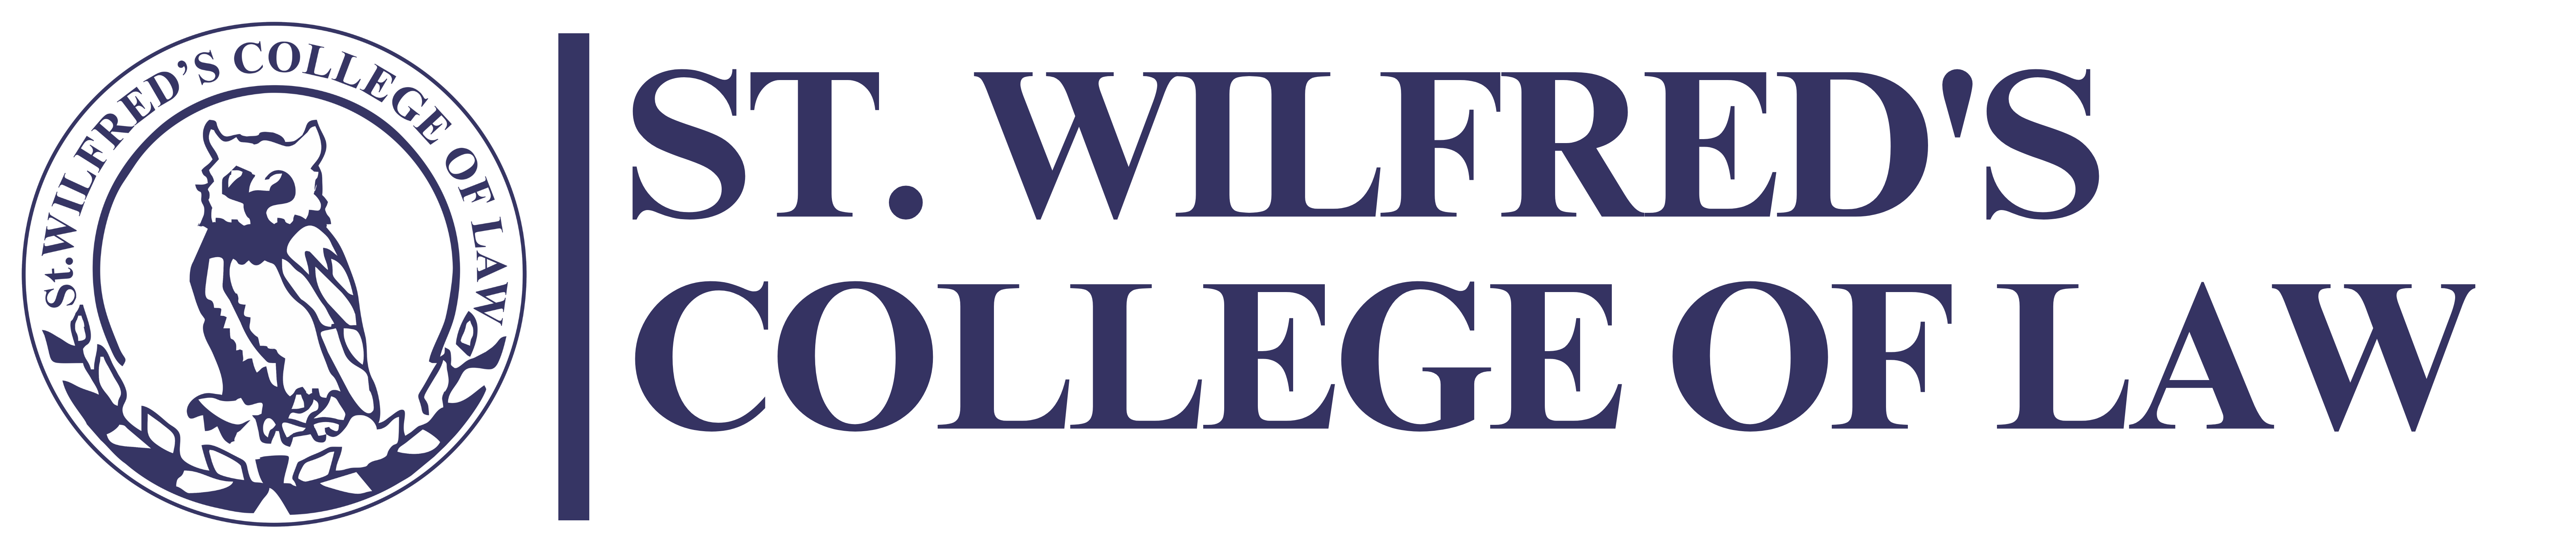 St. Wilfred's college of law